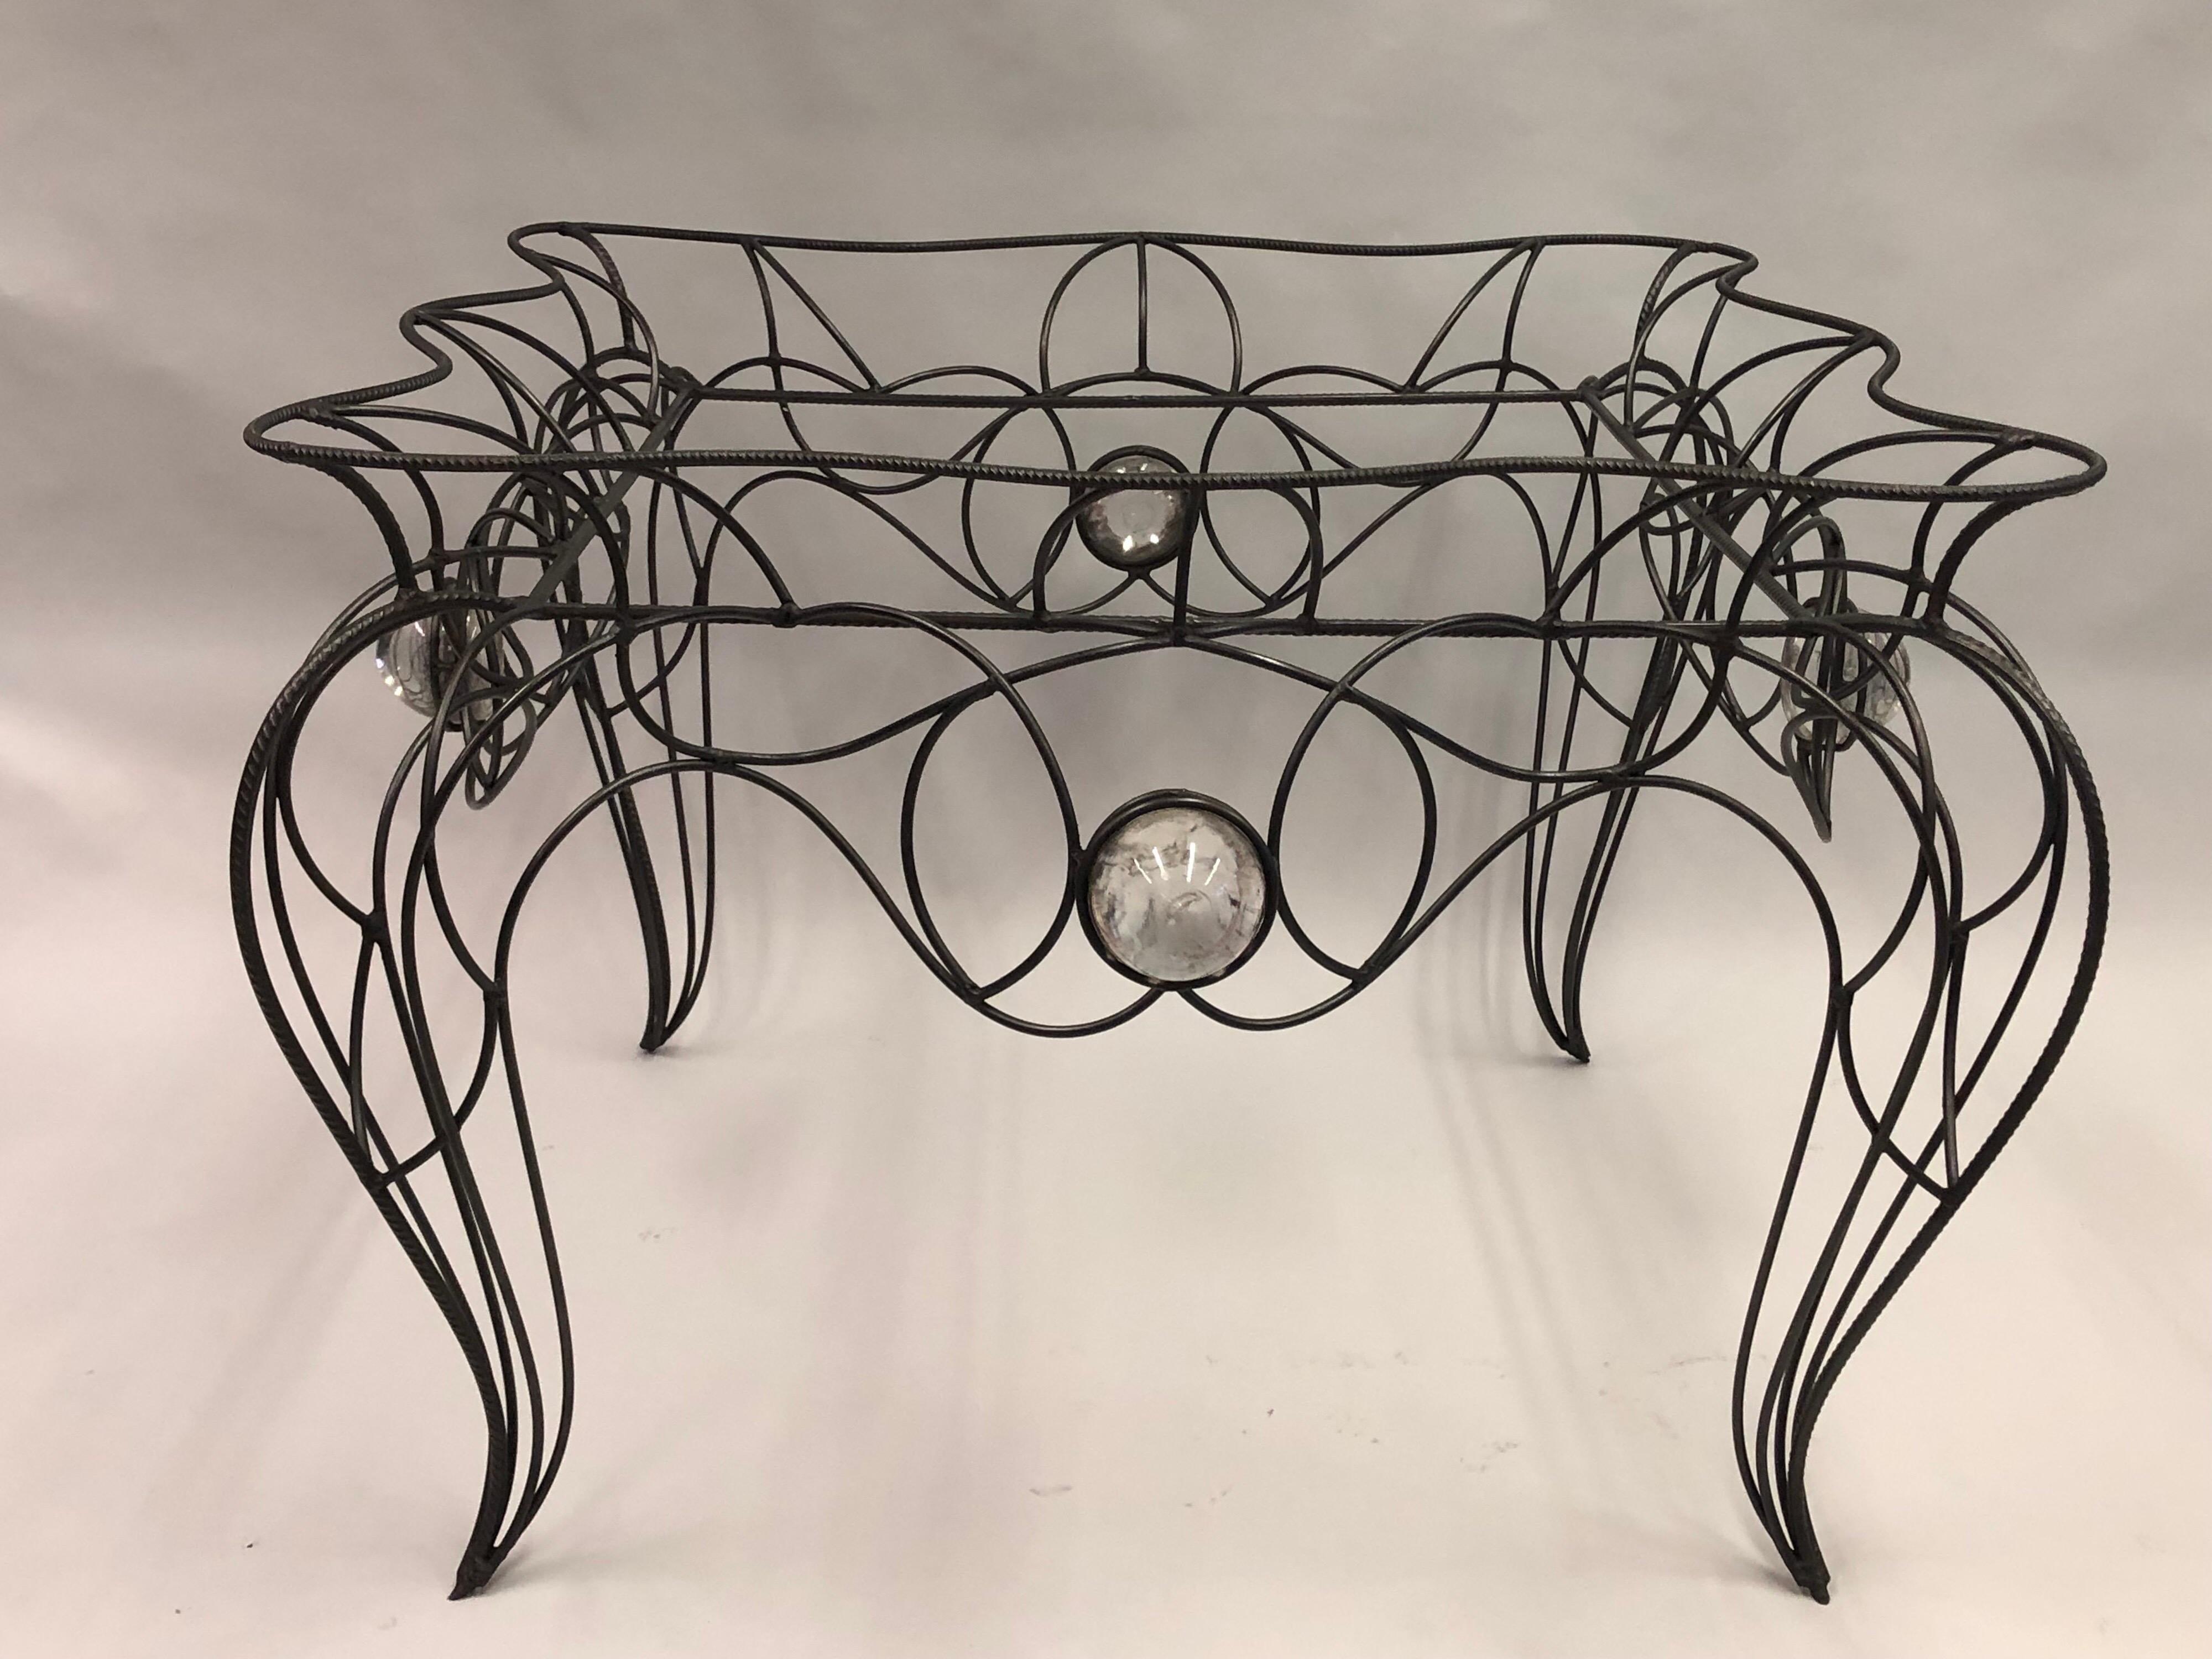 20th Century Unique Handwrought Iron & Crystal Center or Dining Table by Andre Dubreuil, 1986 For Sale